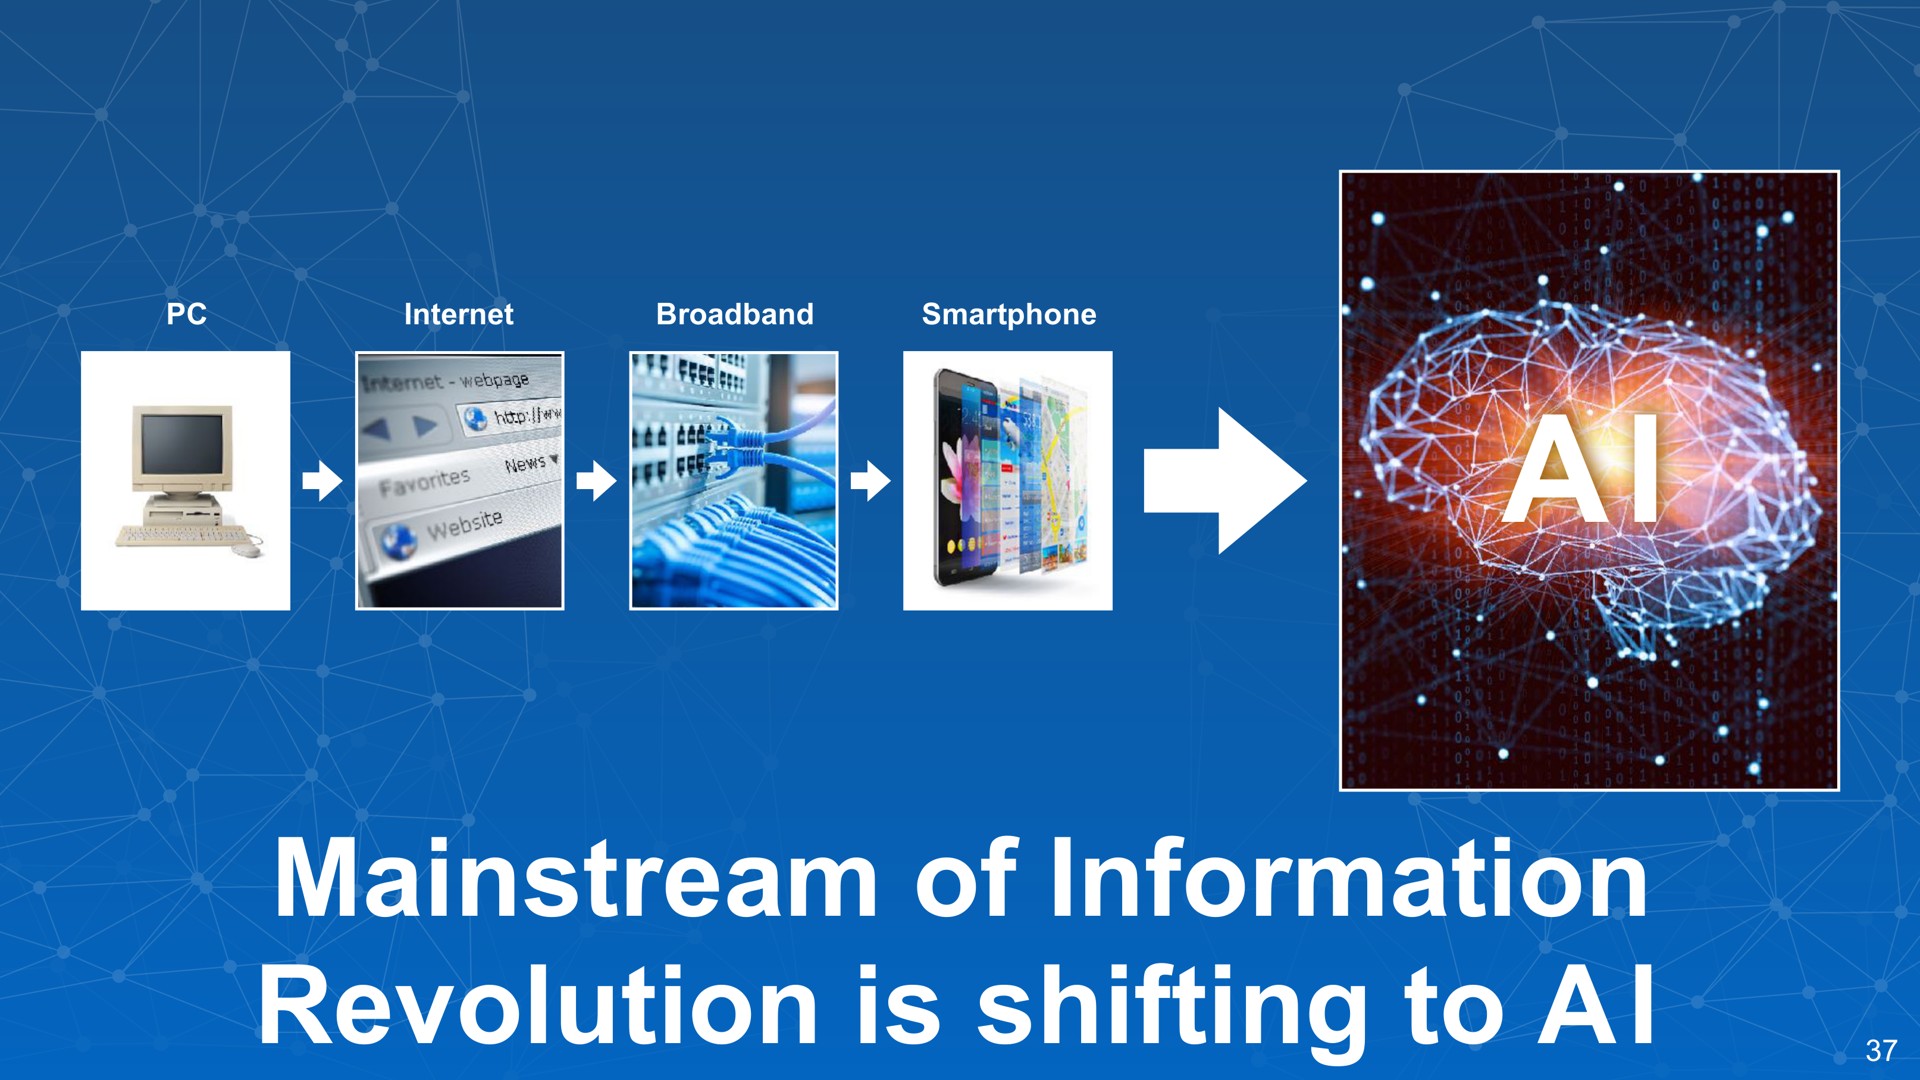 a i of information revolution is shifting to a i | SoftBank